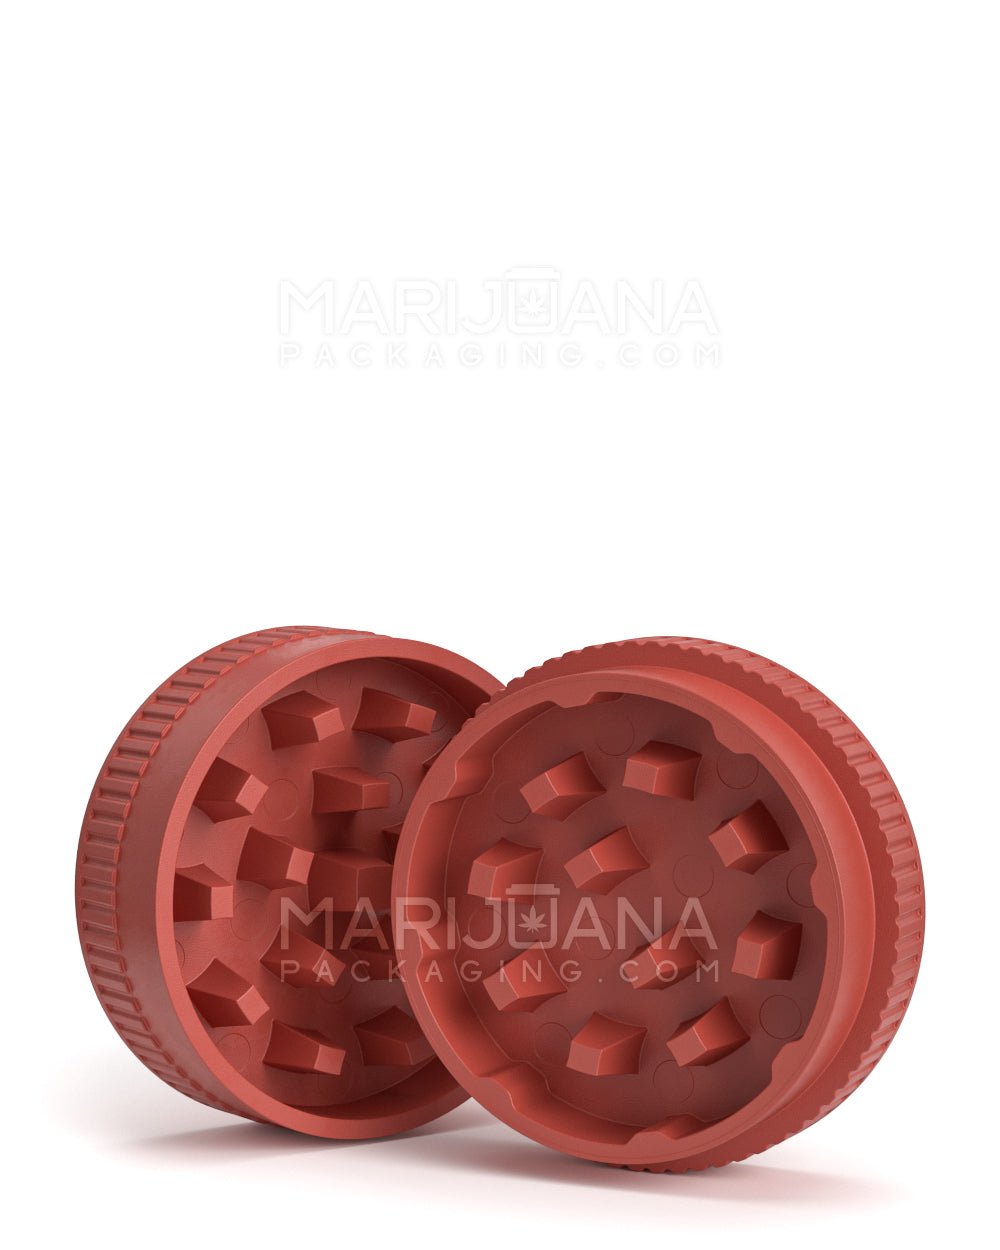 Biodegradable Thick Wall Red Grinder | 2 Piece - 55mm - 12 Count - 7